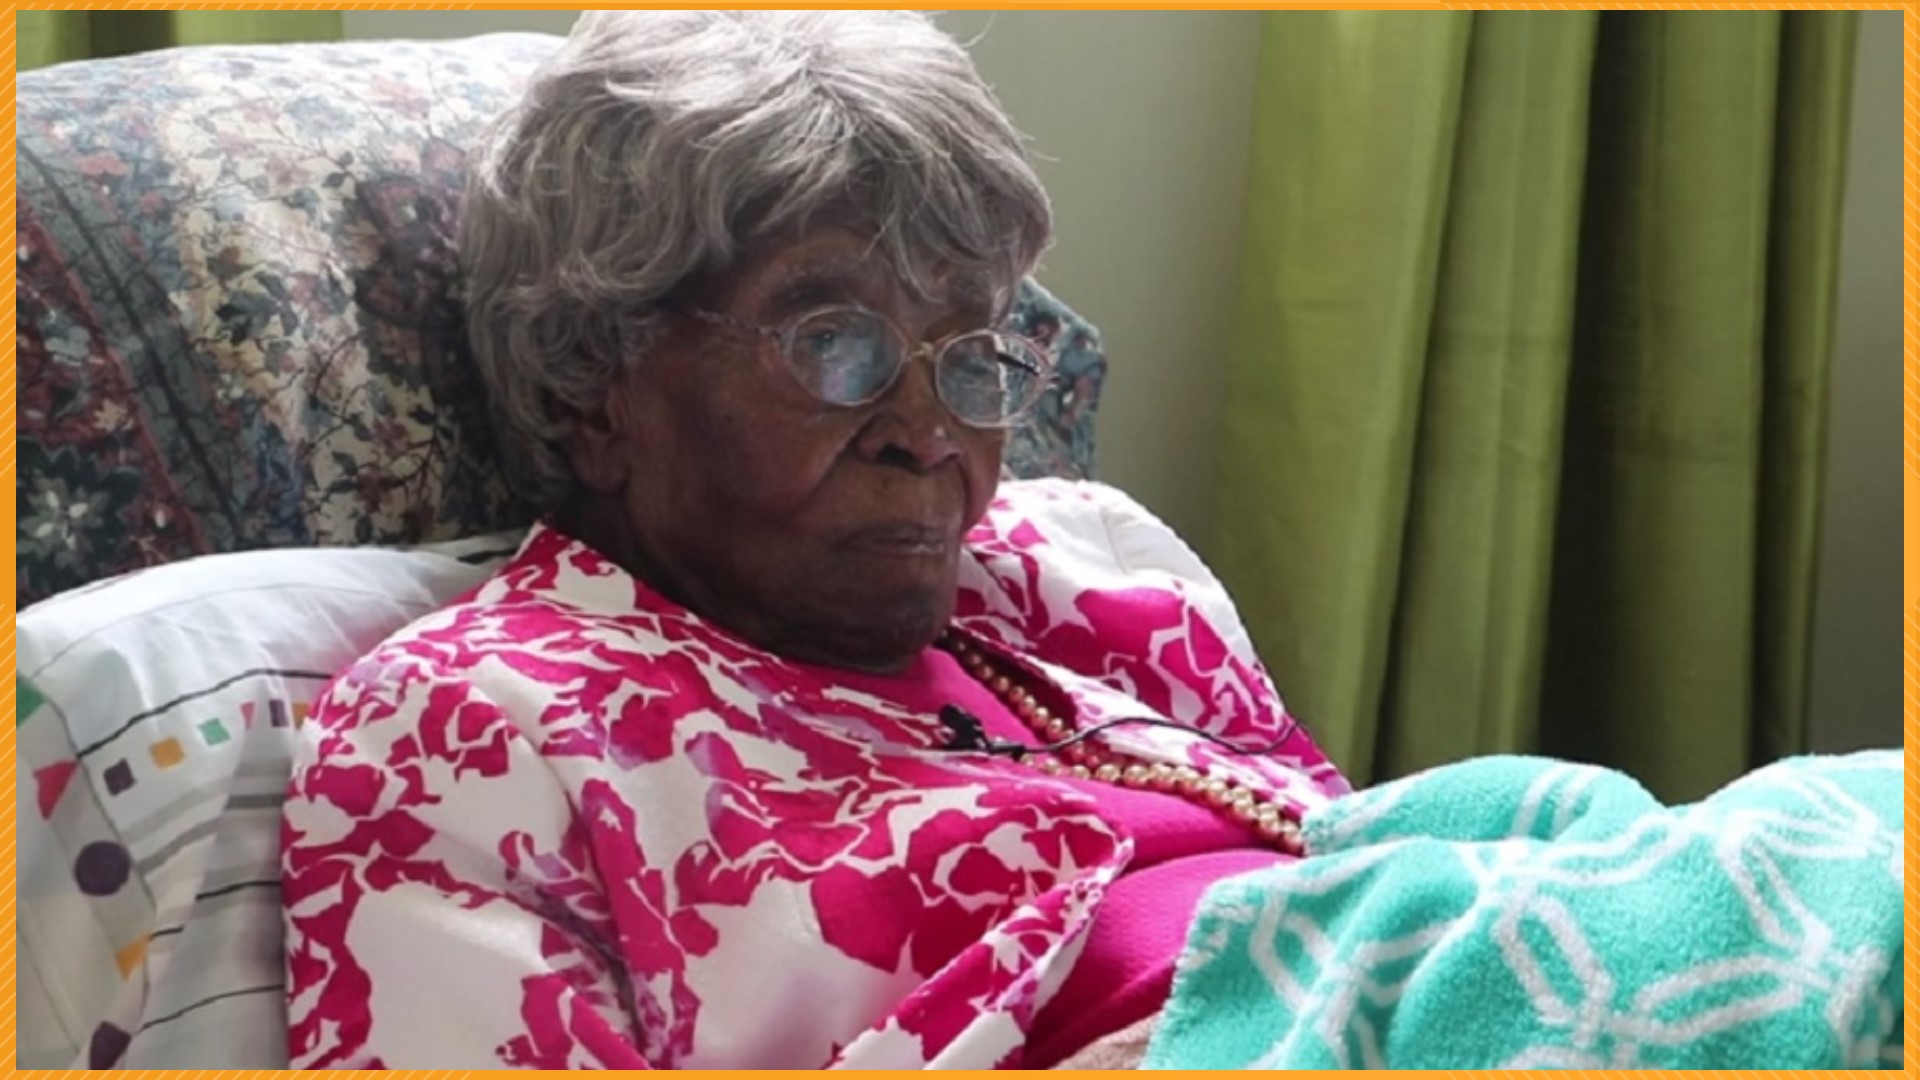 Hester Ford is now the oldest person in the country, and the seventh oldest person in the world. She was born when Theodore Roosevelt was president.